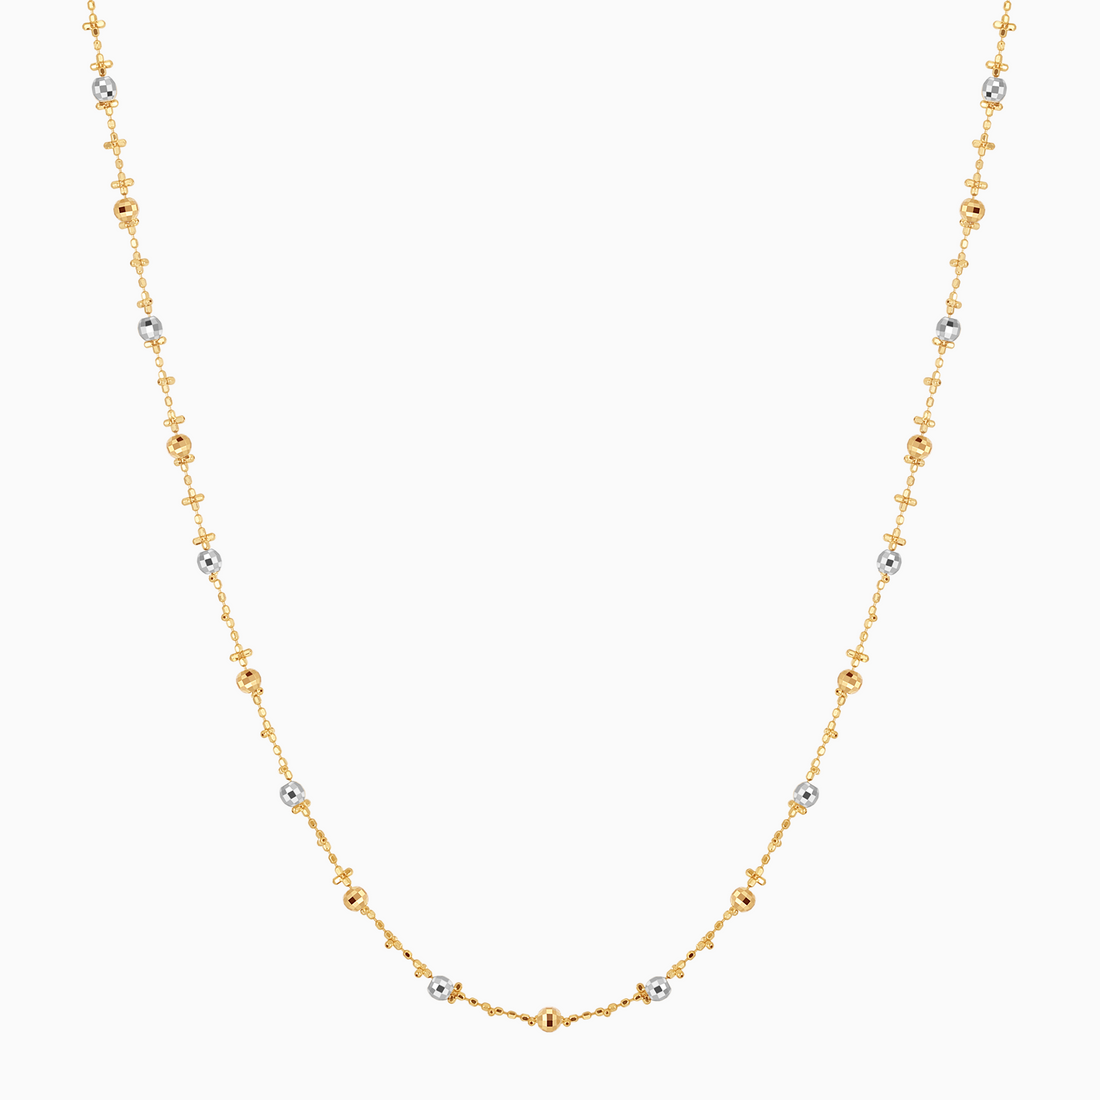 Merino Necklace - Solid Gold